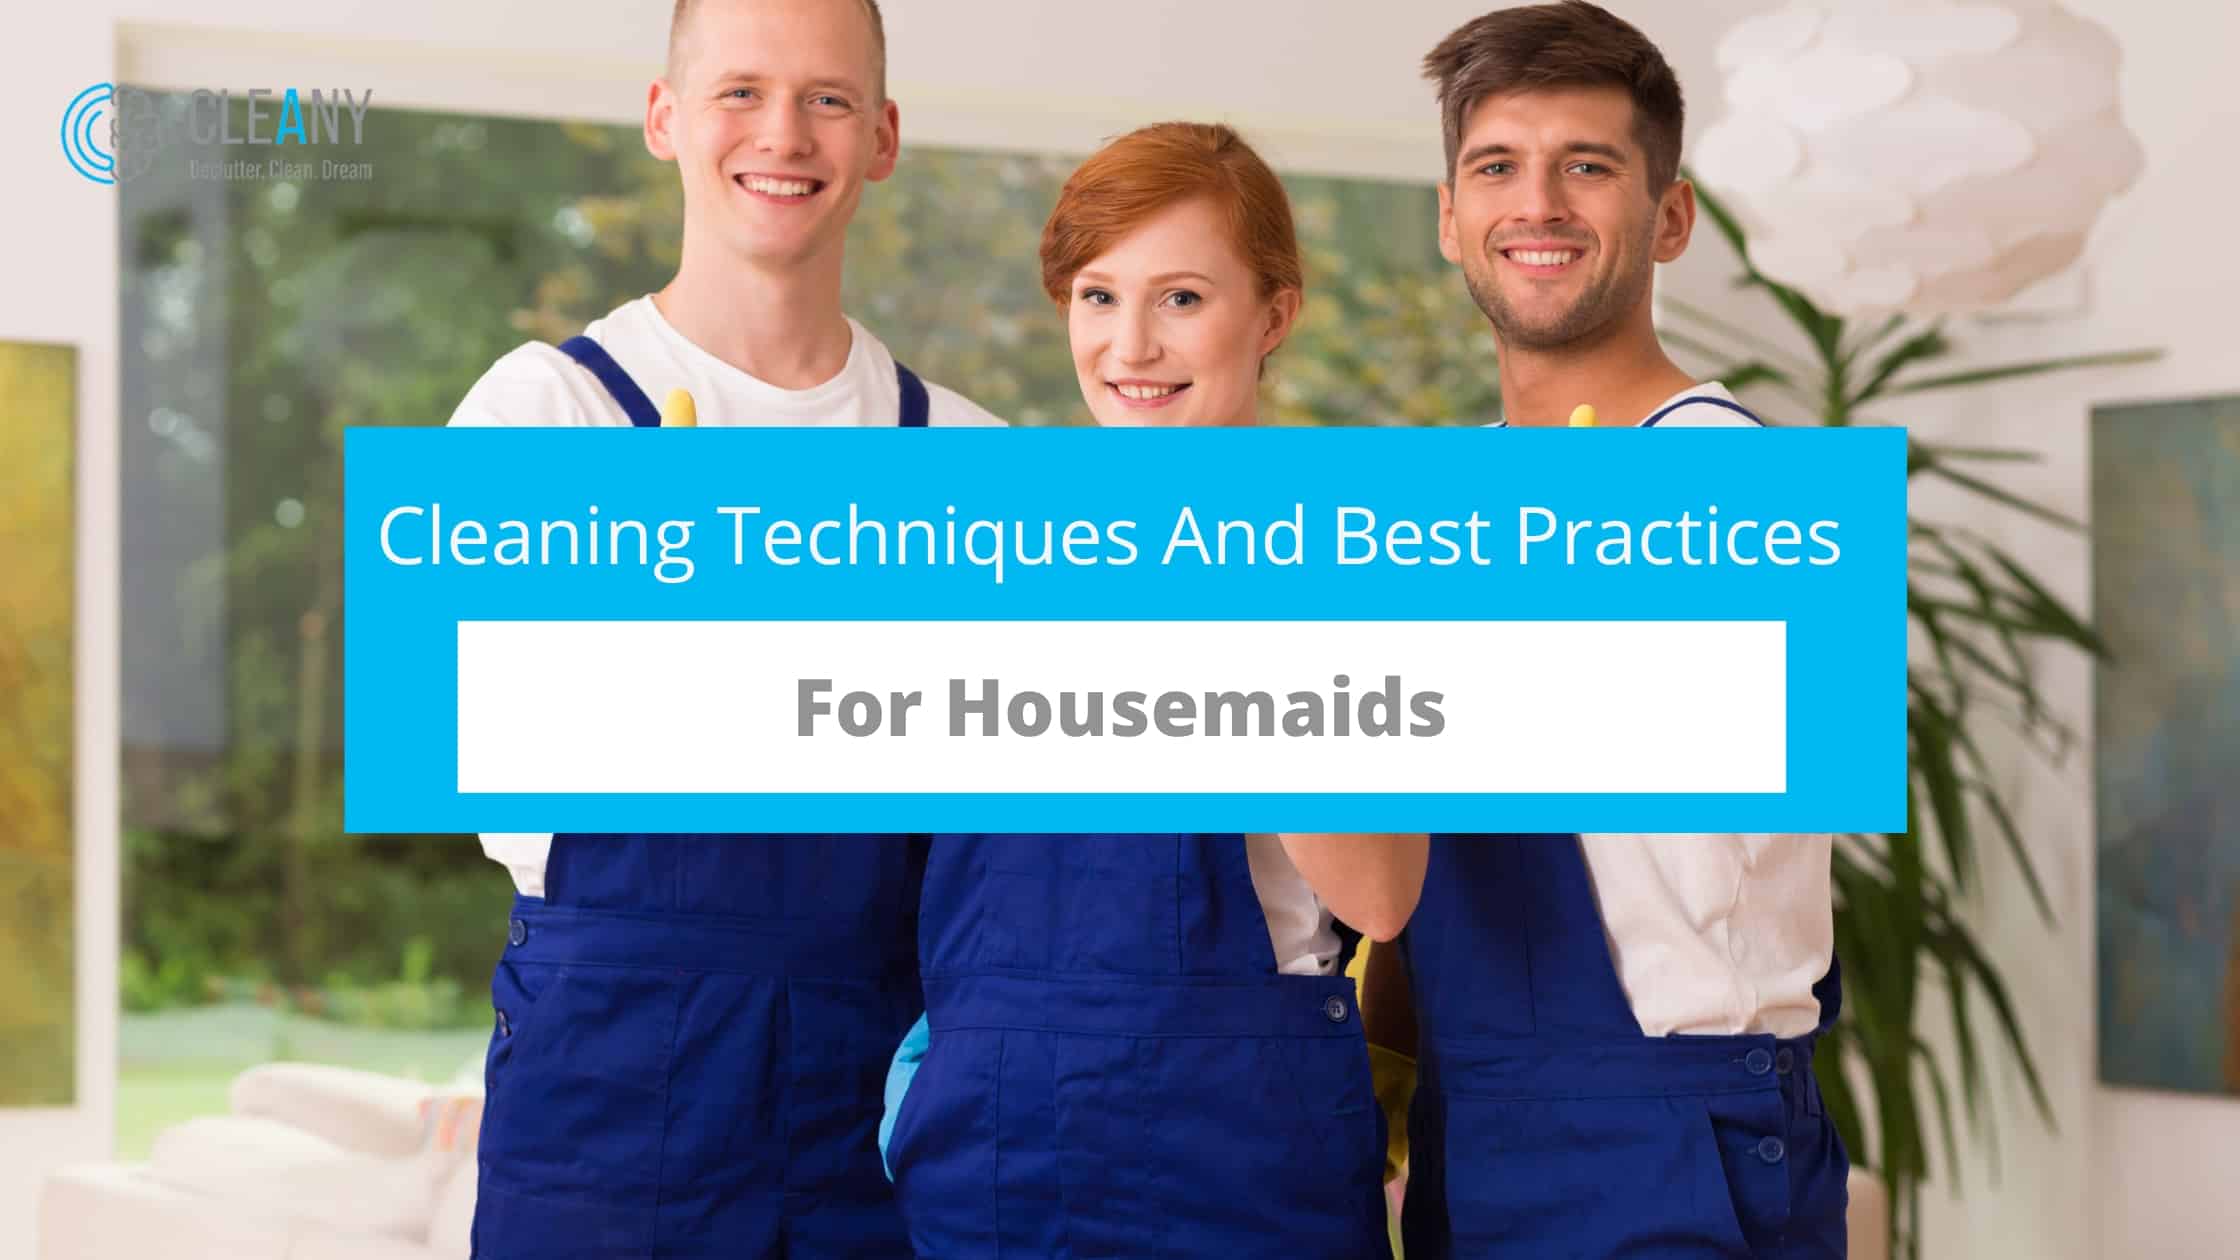 Cleaning Techniques And Best Practices For Housemaids